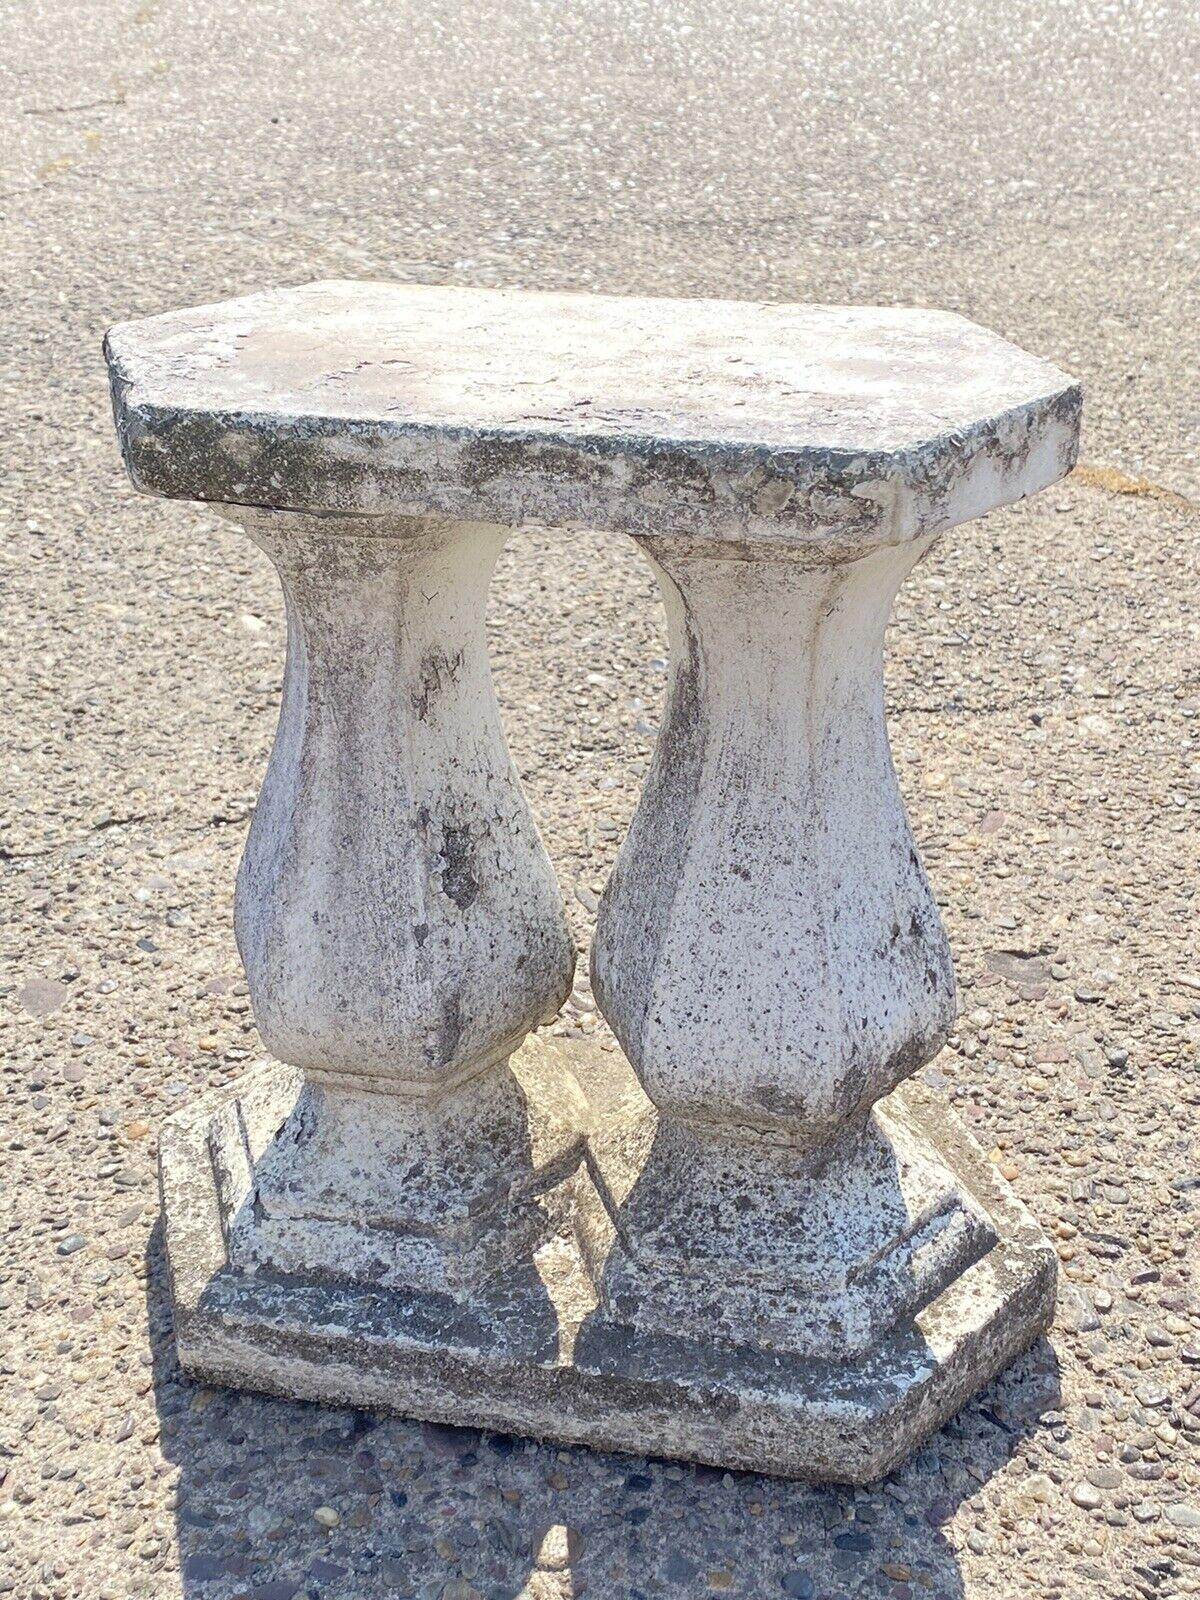 Vintage Classical Concrete Cement Double Baluster Outdoor Garden Bench Pedestals In Good Condition For Sale In Philadelphia, PA